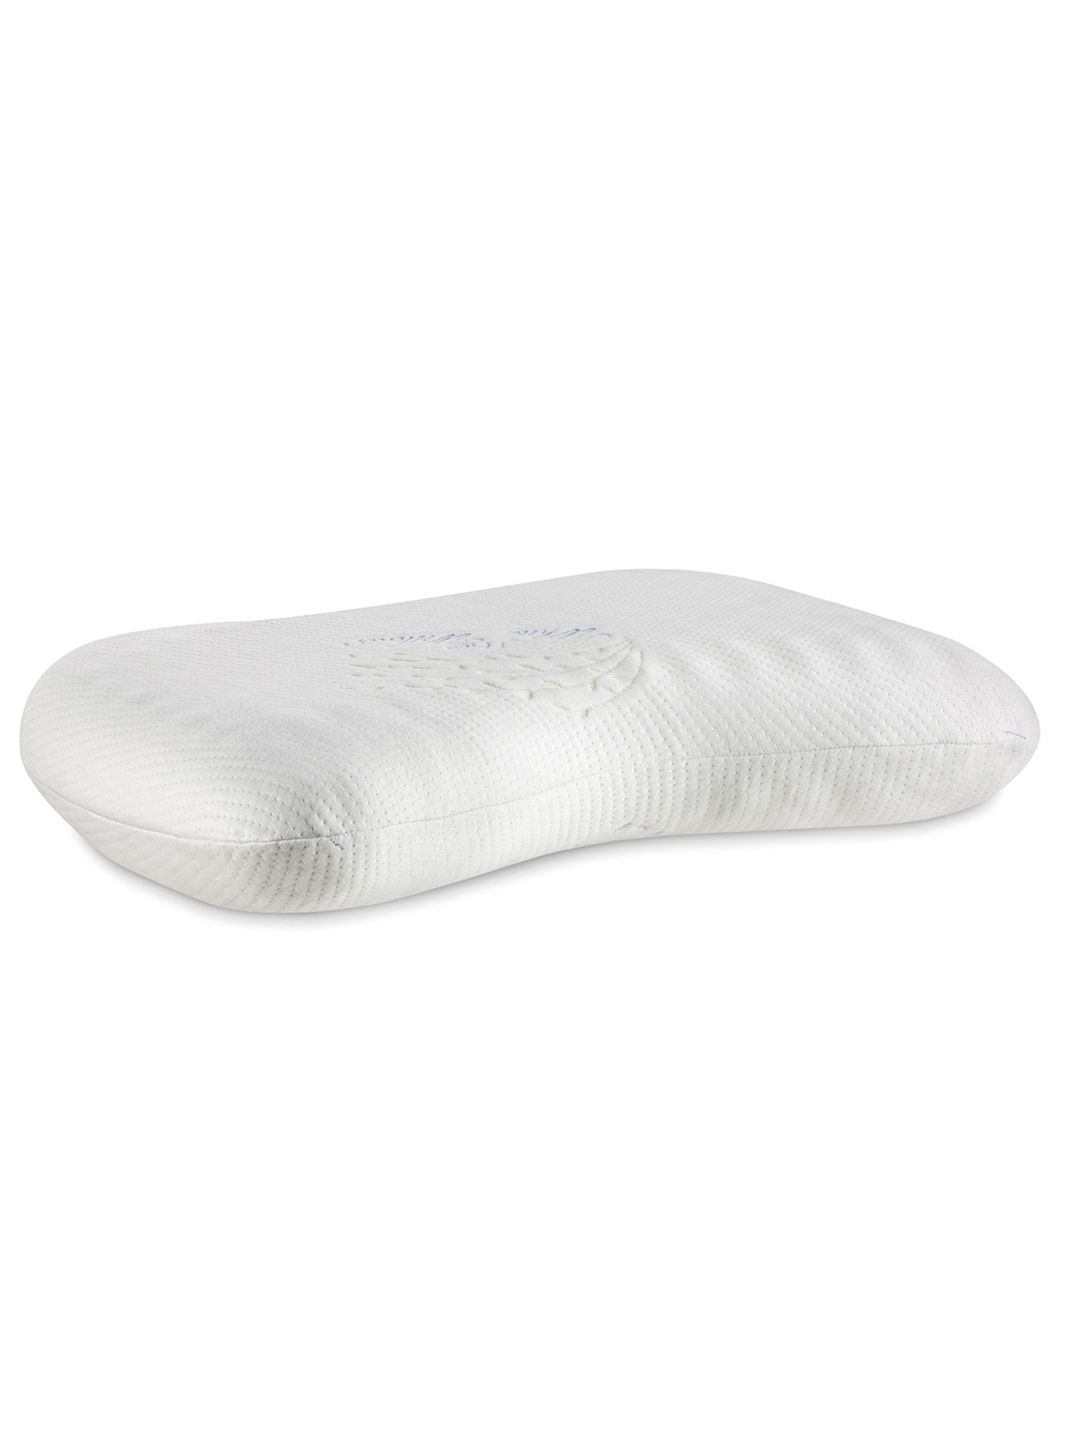 The White Willow White Special Wave Cervical Contour Orthopedic Memory Foam Bed Pillow Price in India